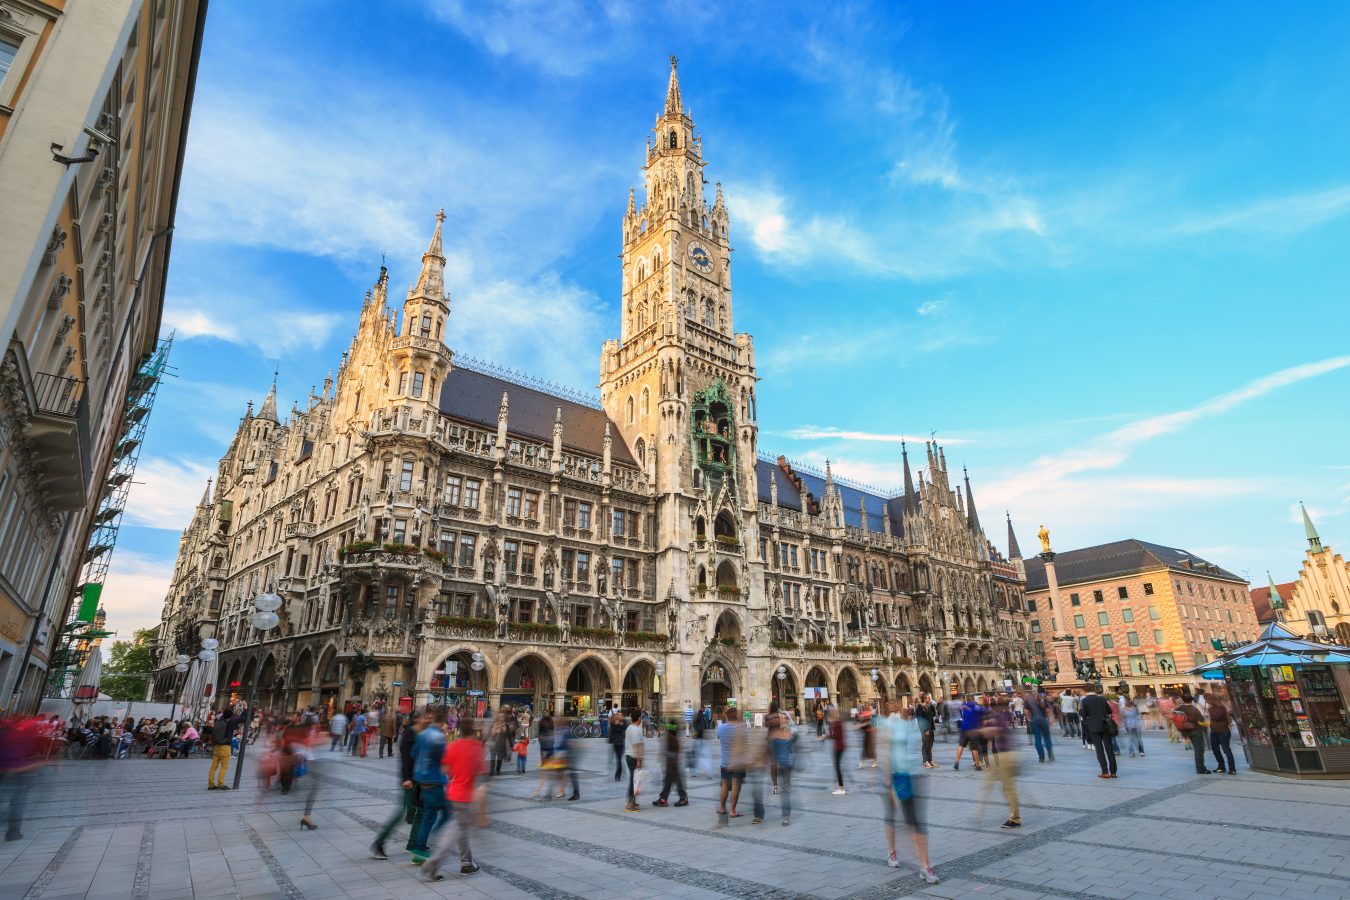 Marienplatz town hall in Munich, Germany busy with people walking around on a sunny day.